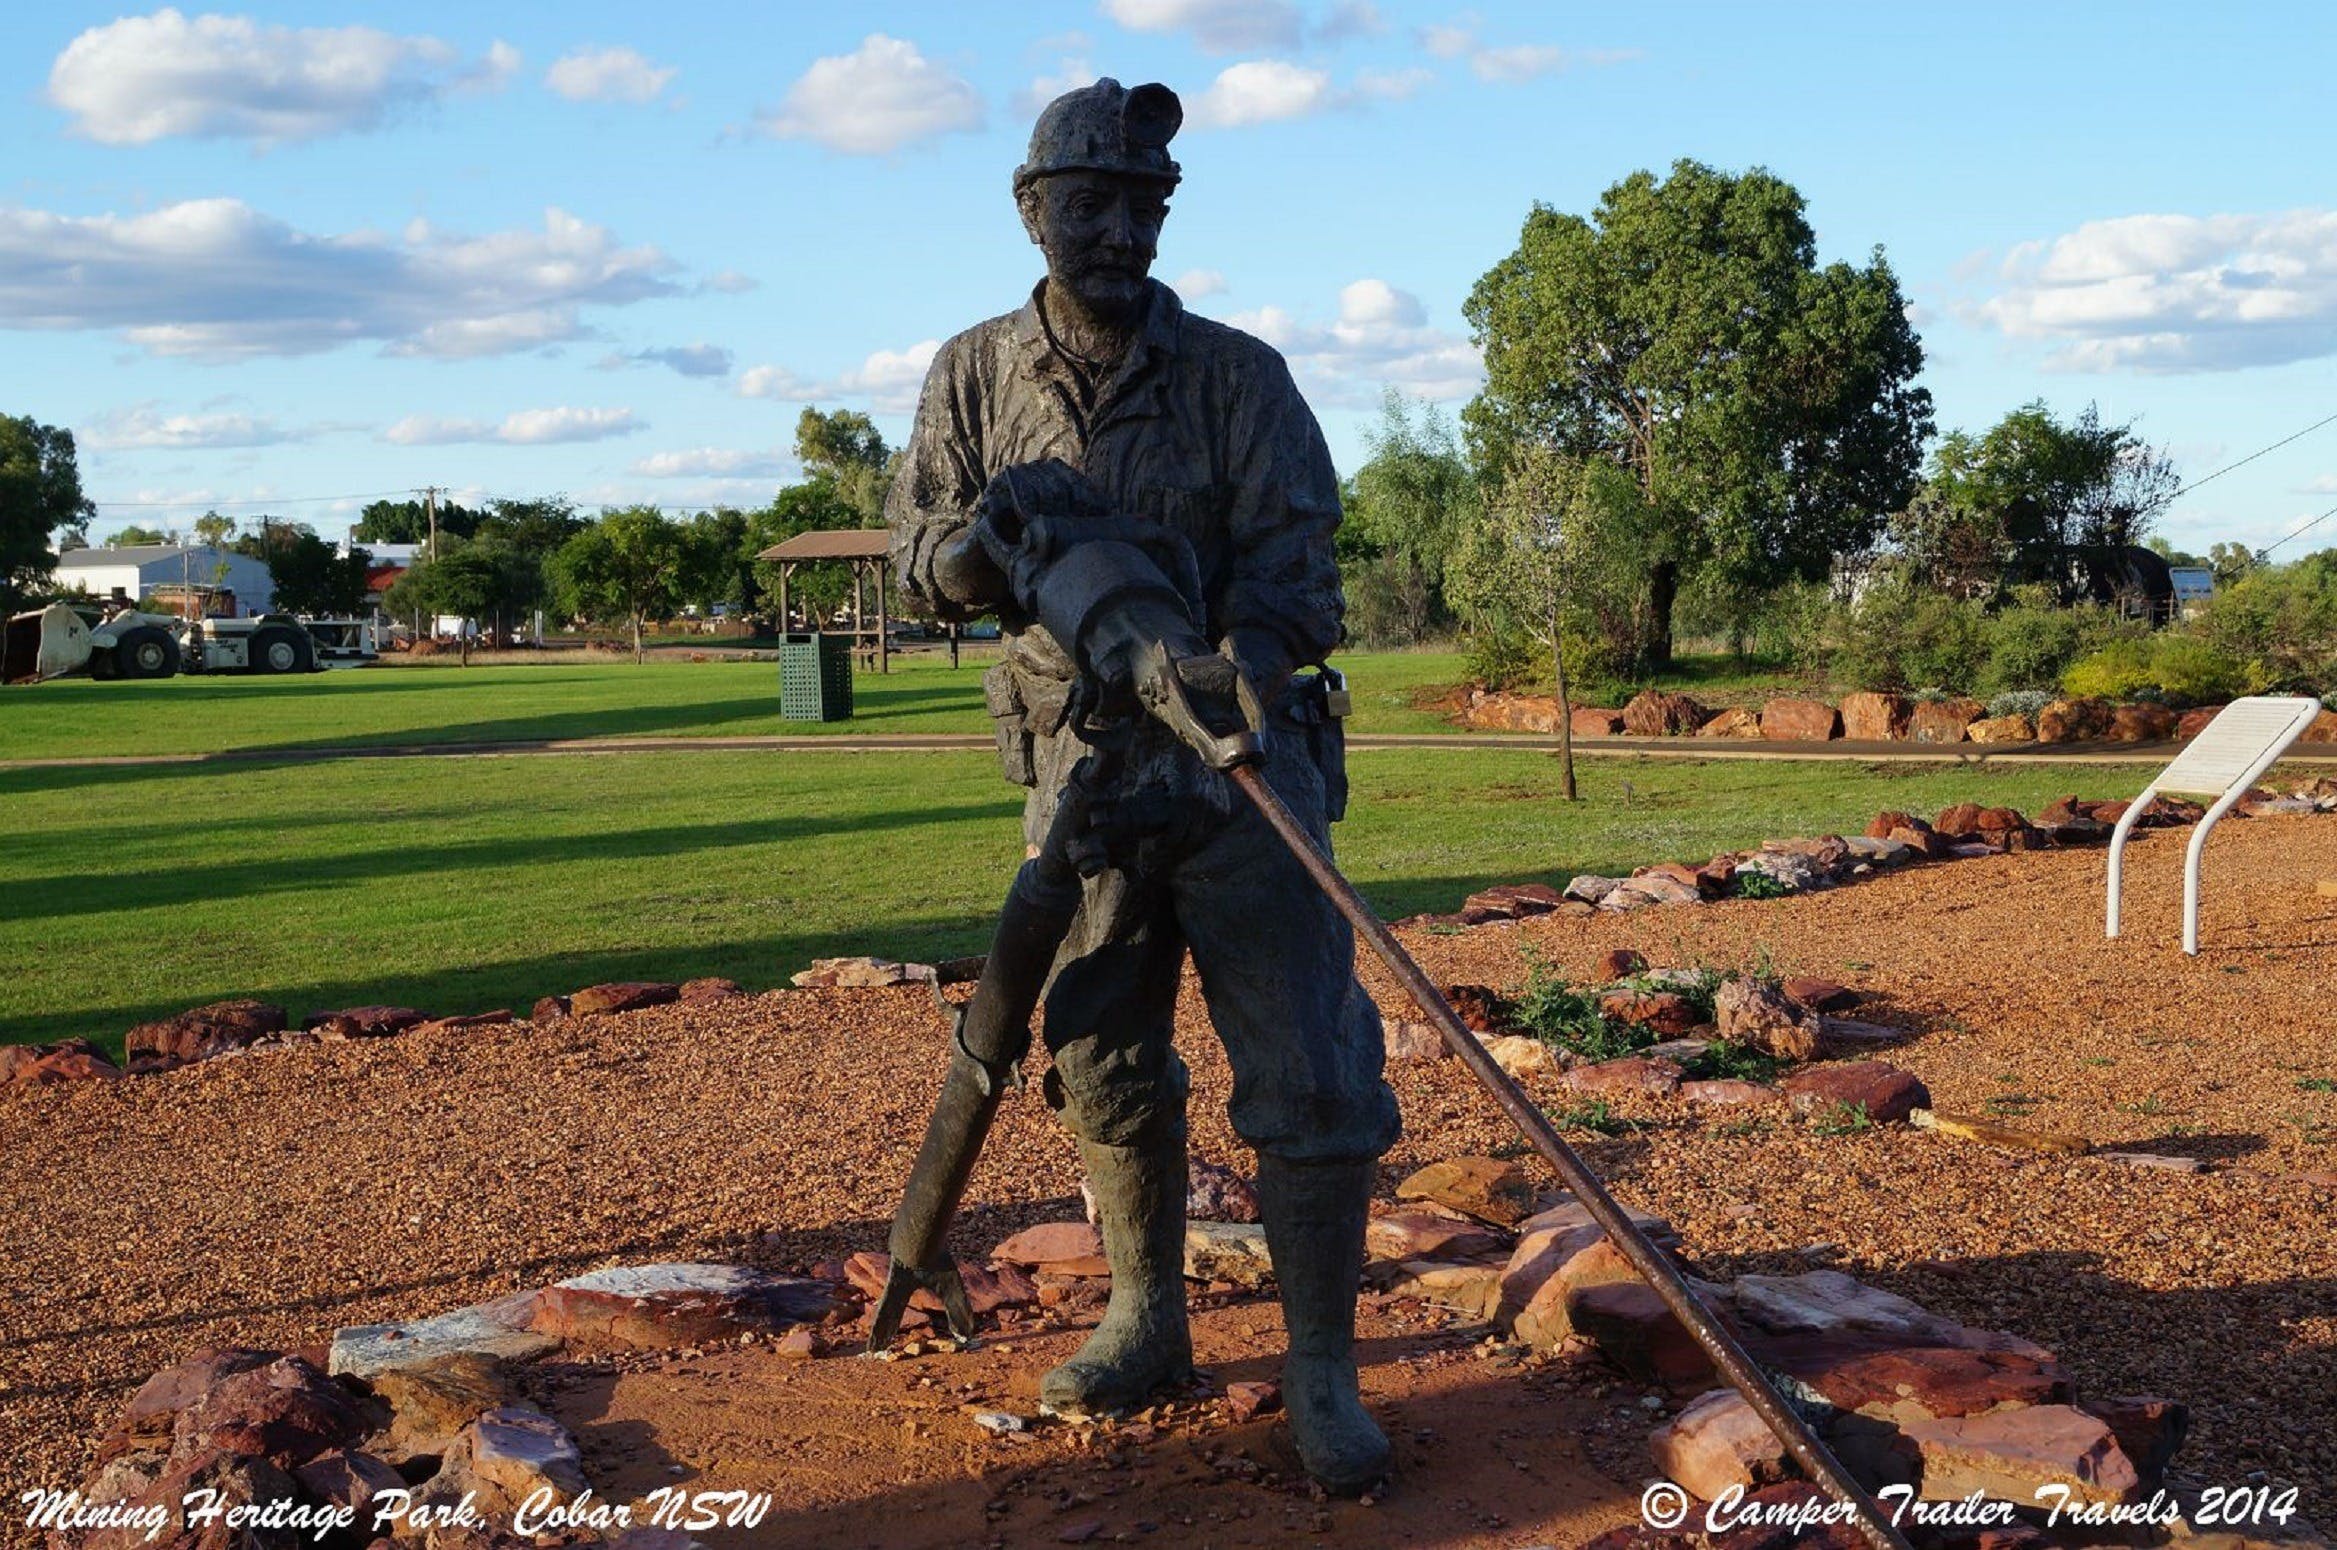 Cobar Miners Heritage Park - Accommodation Nelson Bay